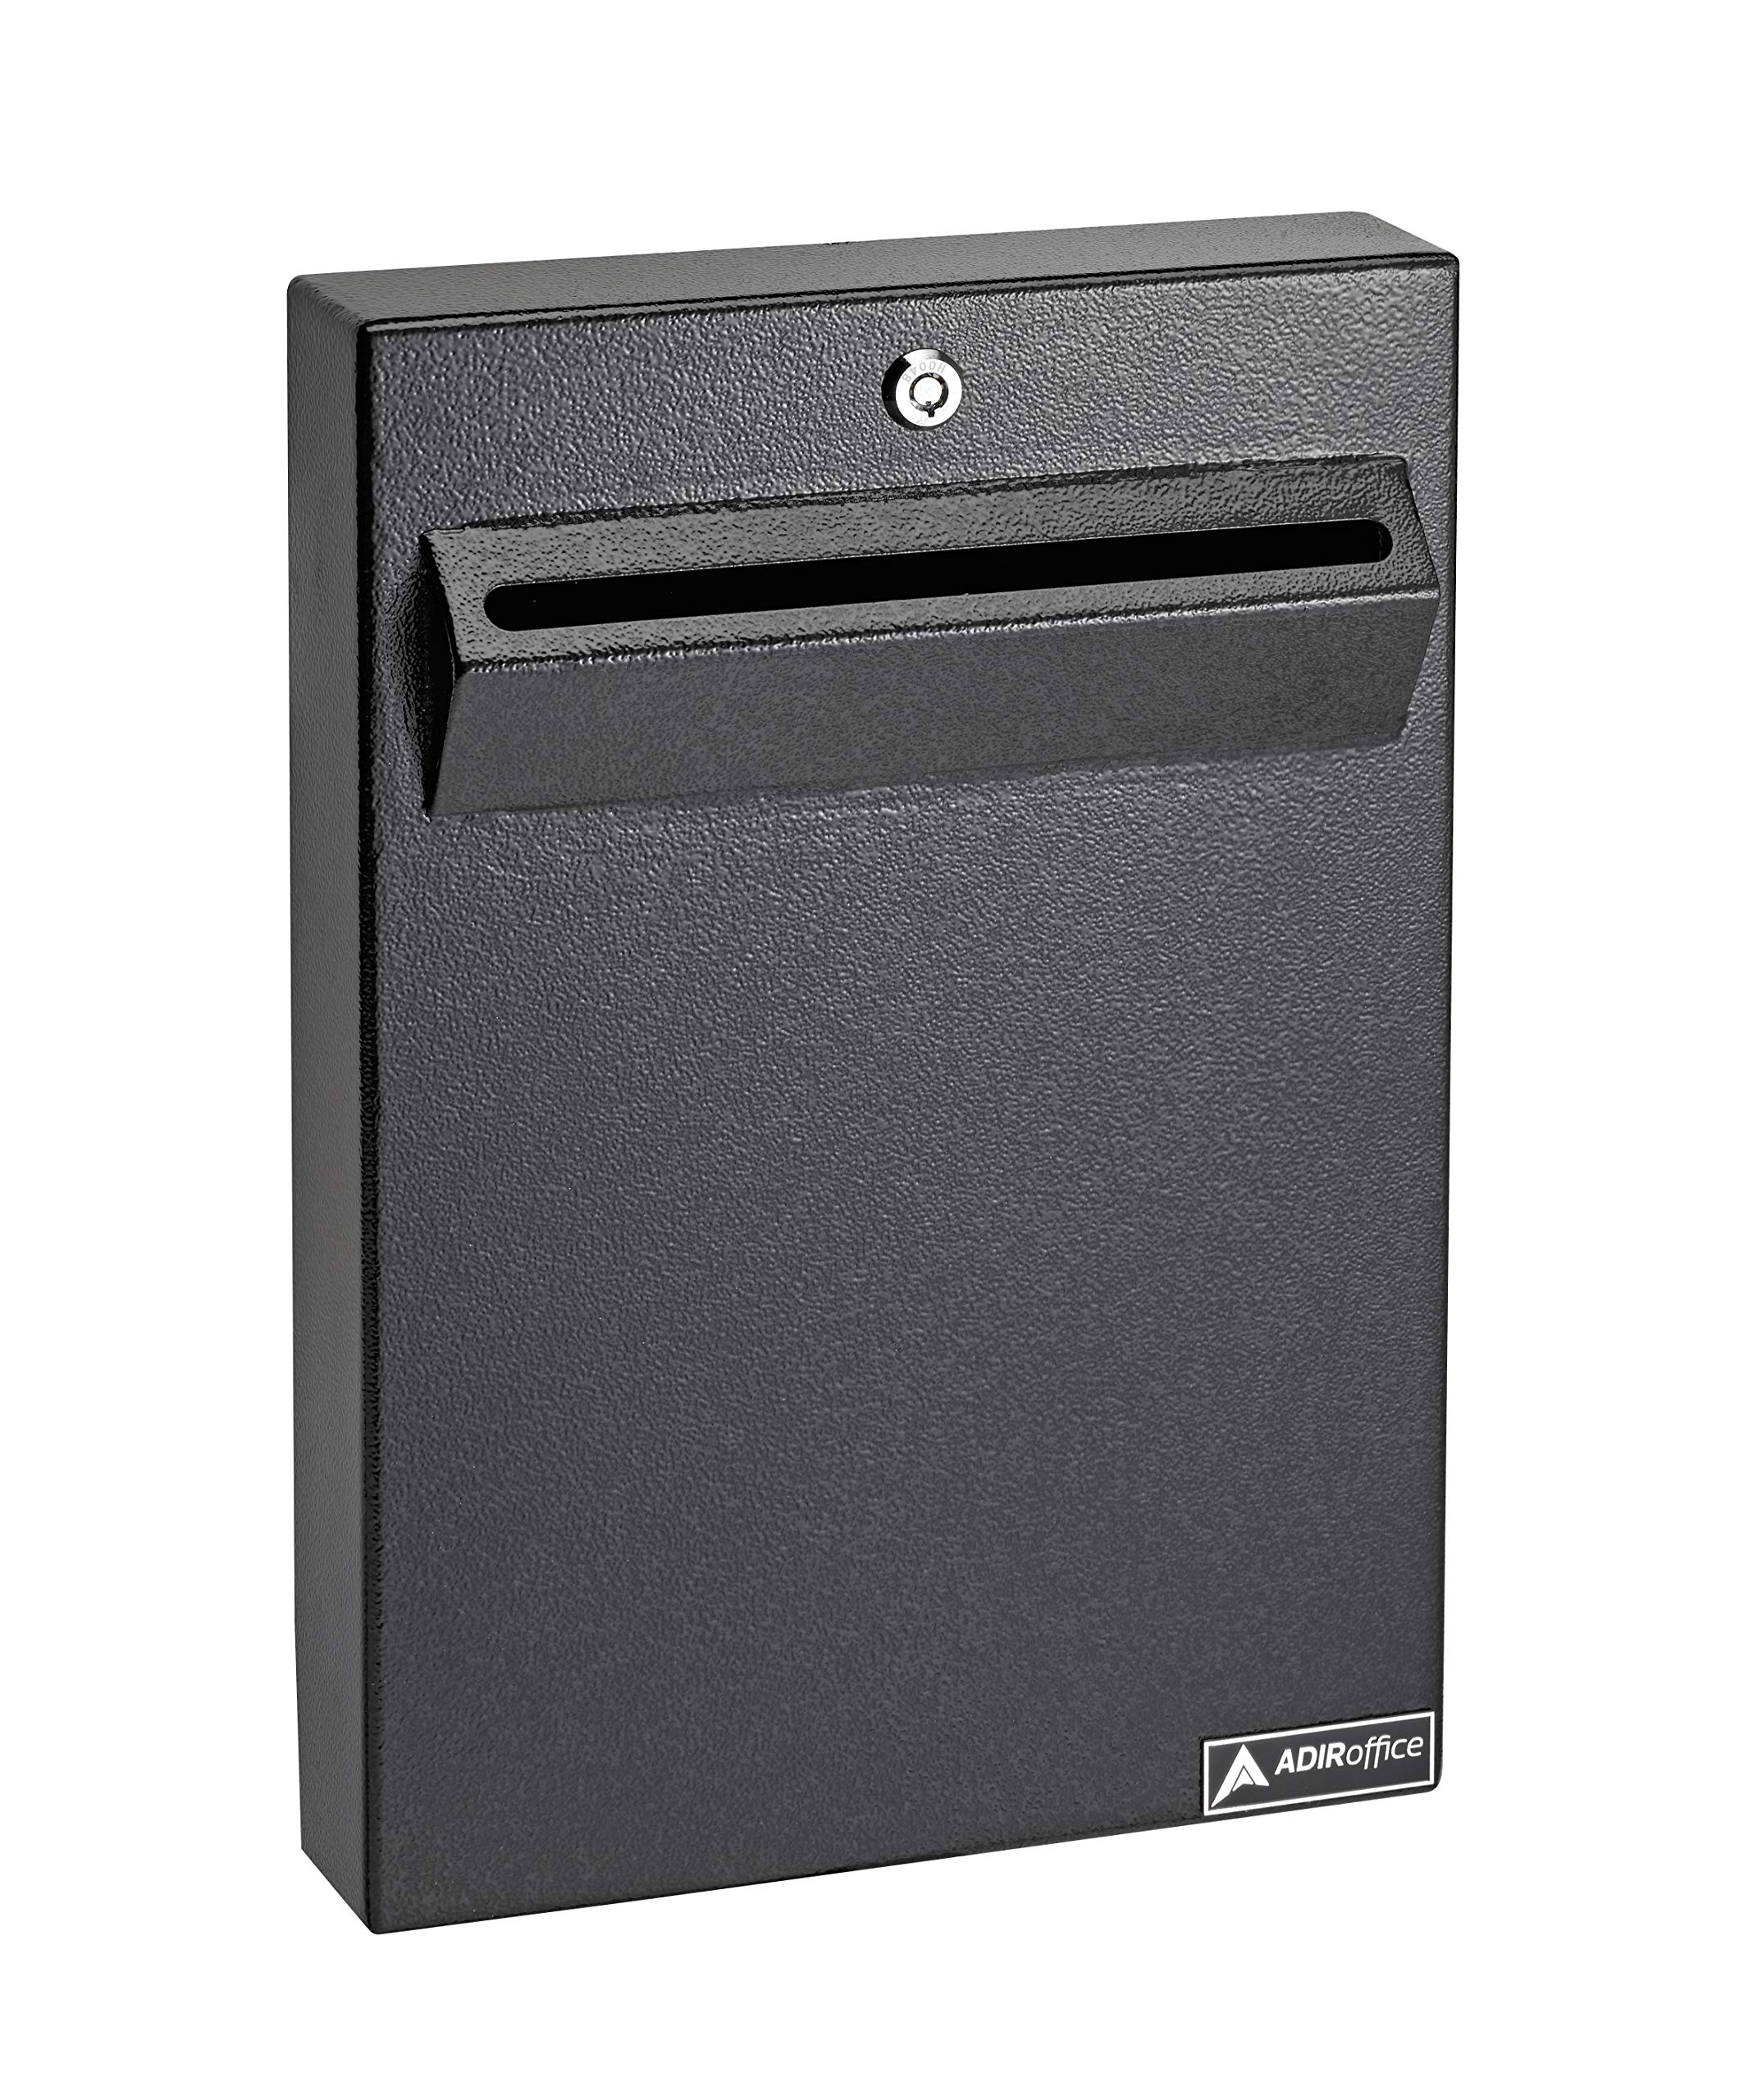 AdirOffice Wall Mount Drop Box - Heavy Duty Secured Storage with Lock - for Commercial Home Office or Business Use Variation  - Very Good